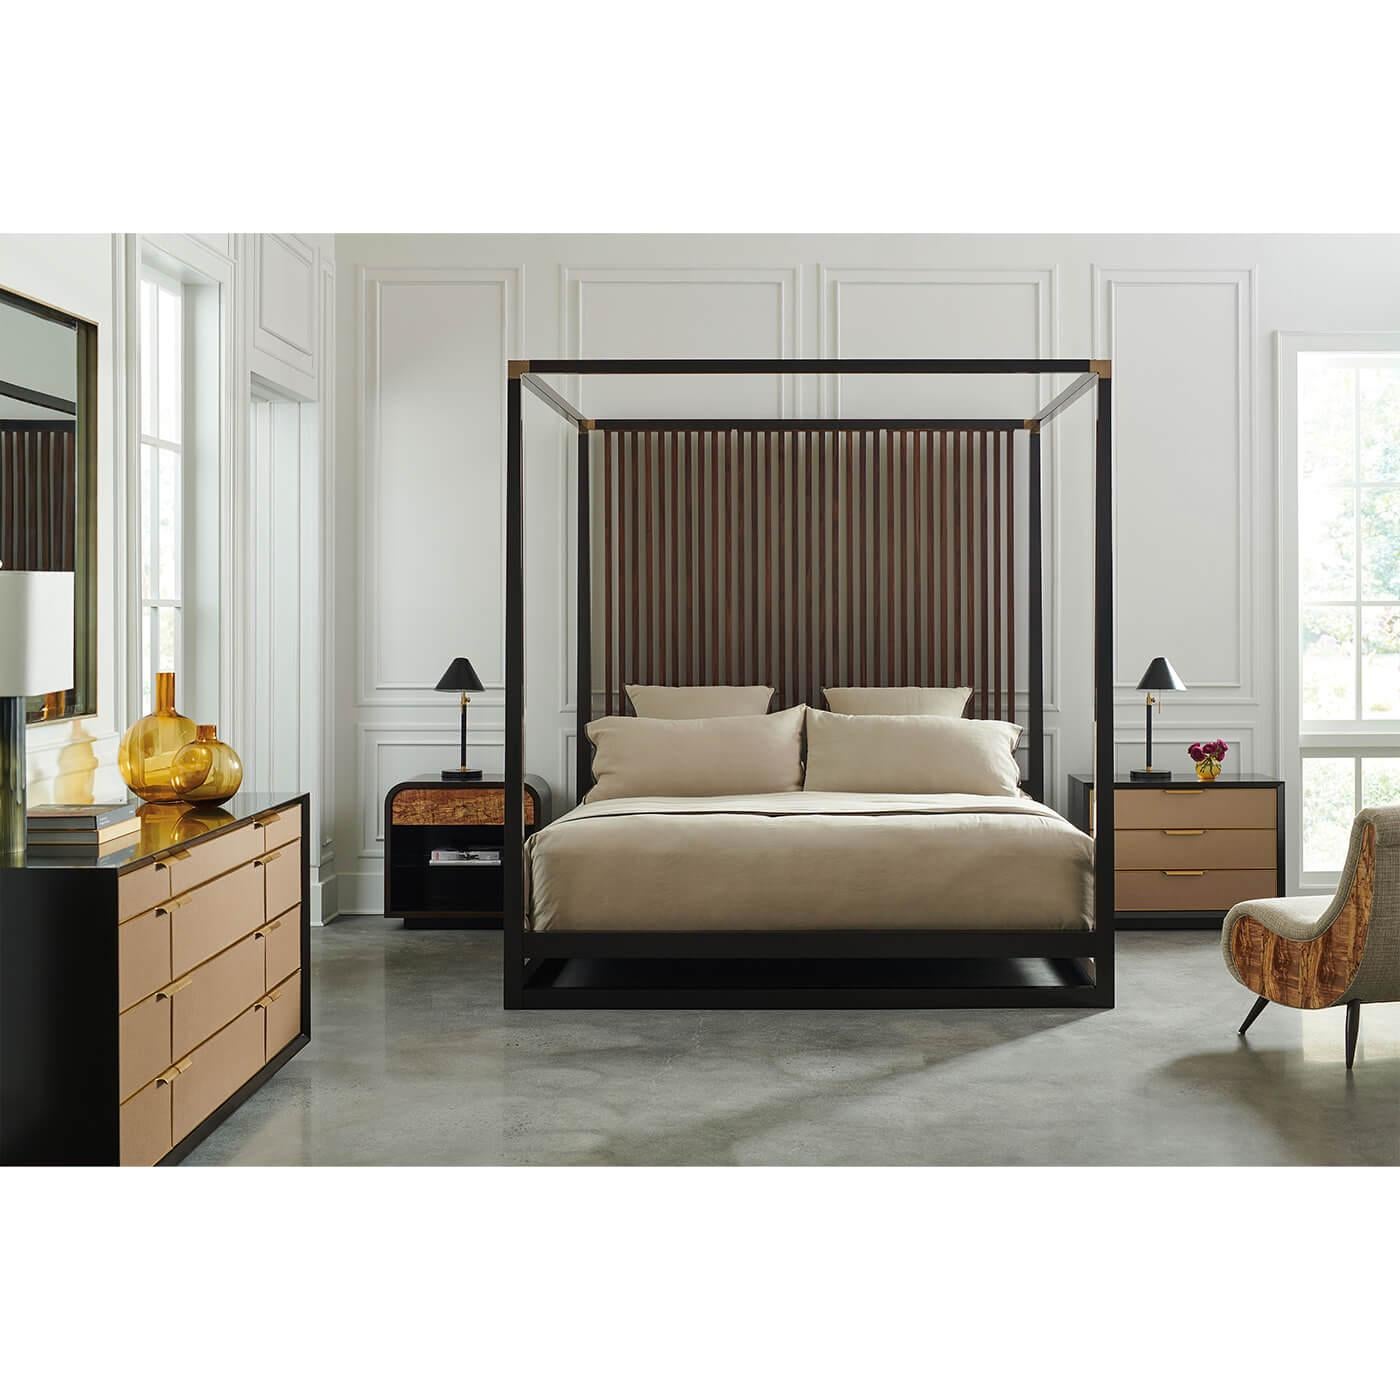 Contemporary Mid Century Modern Canopy Bed - California King